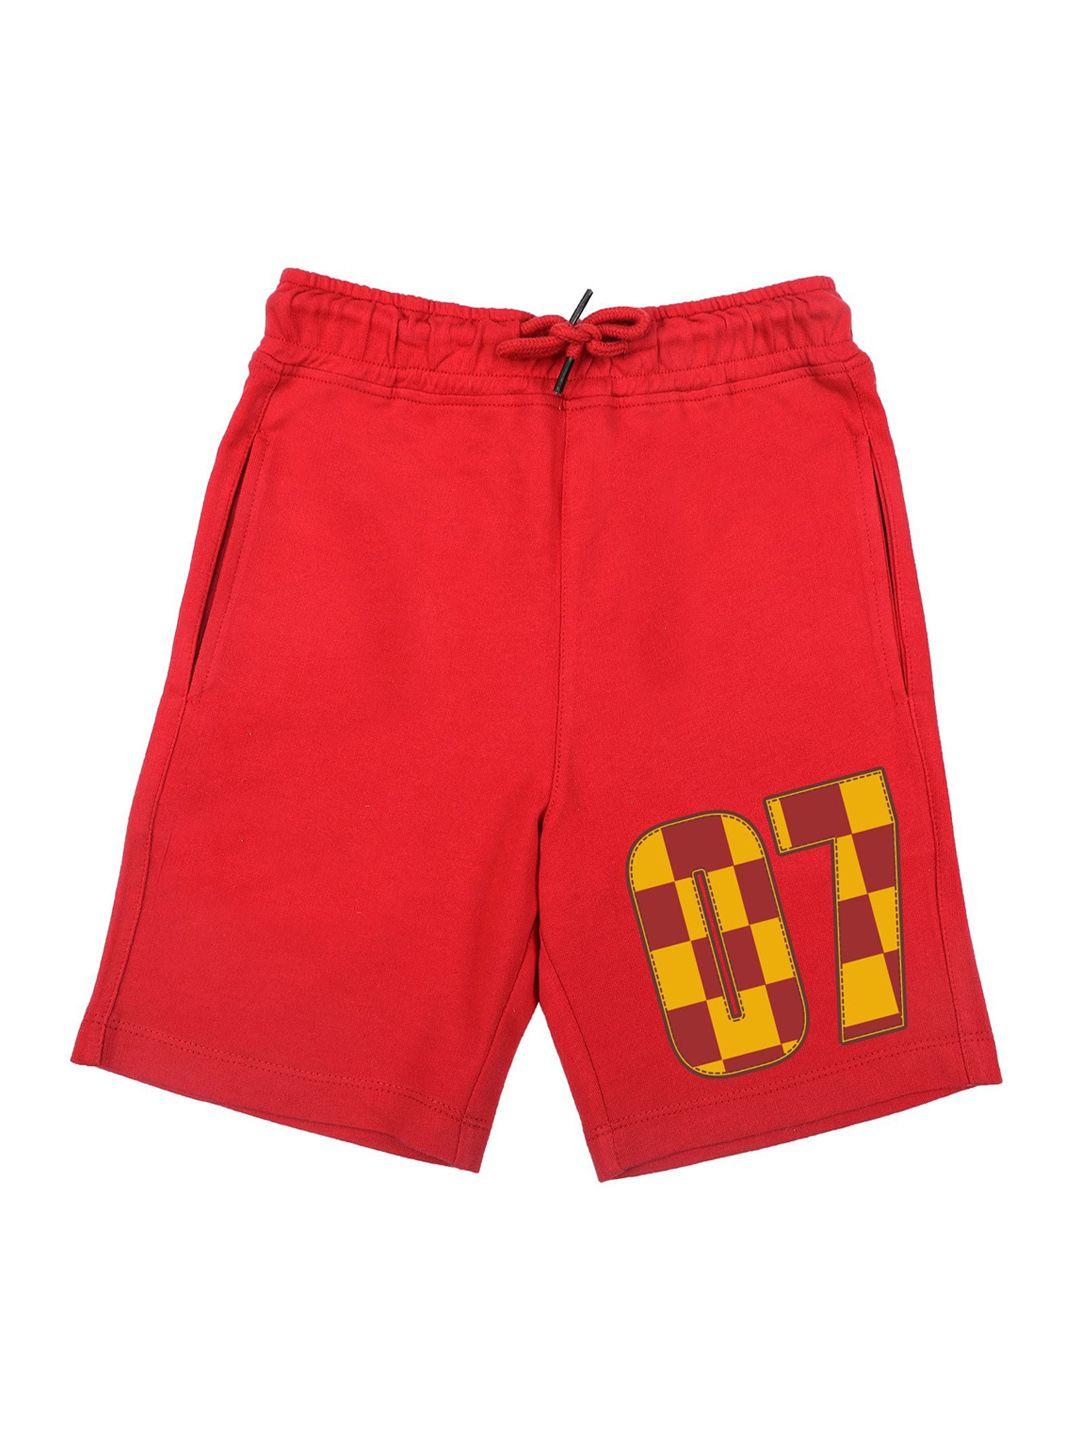 harry potter by wear your mind boys red printed harry potter shorts